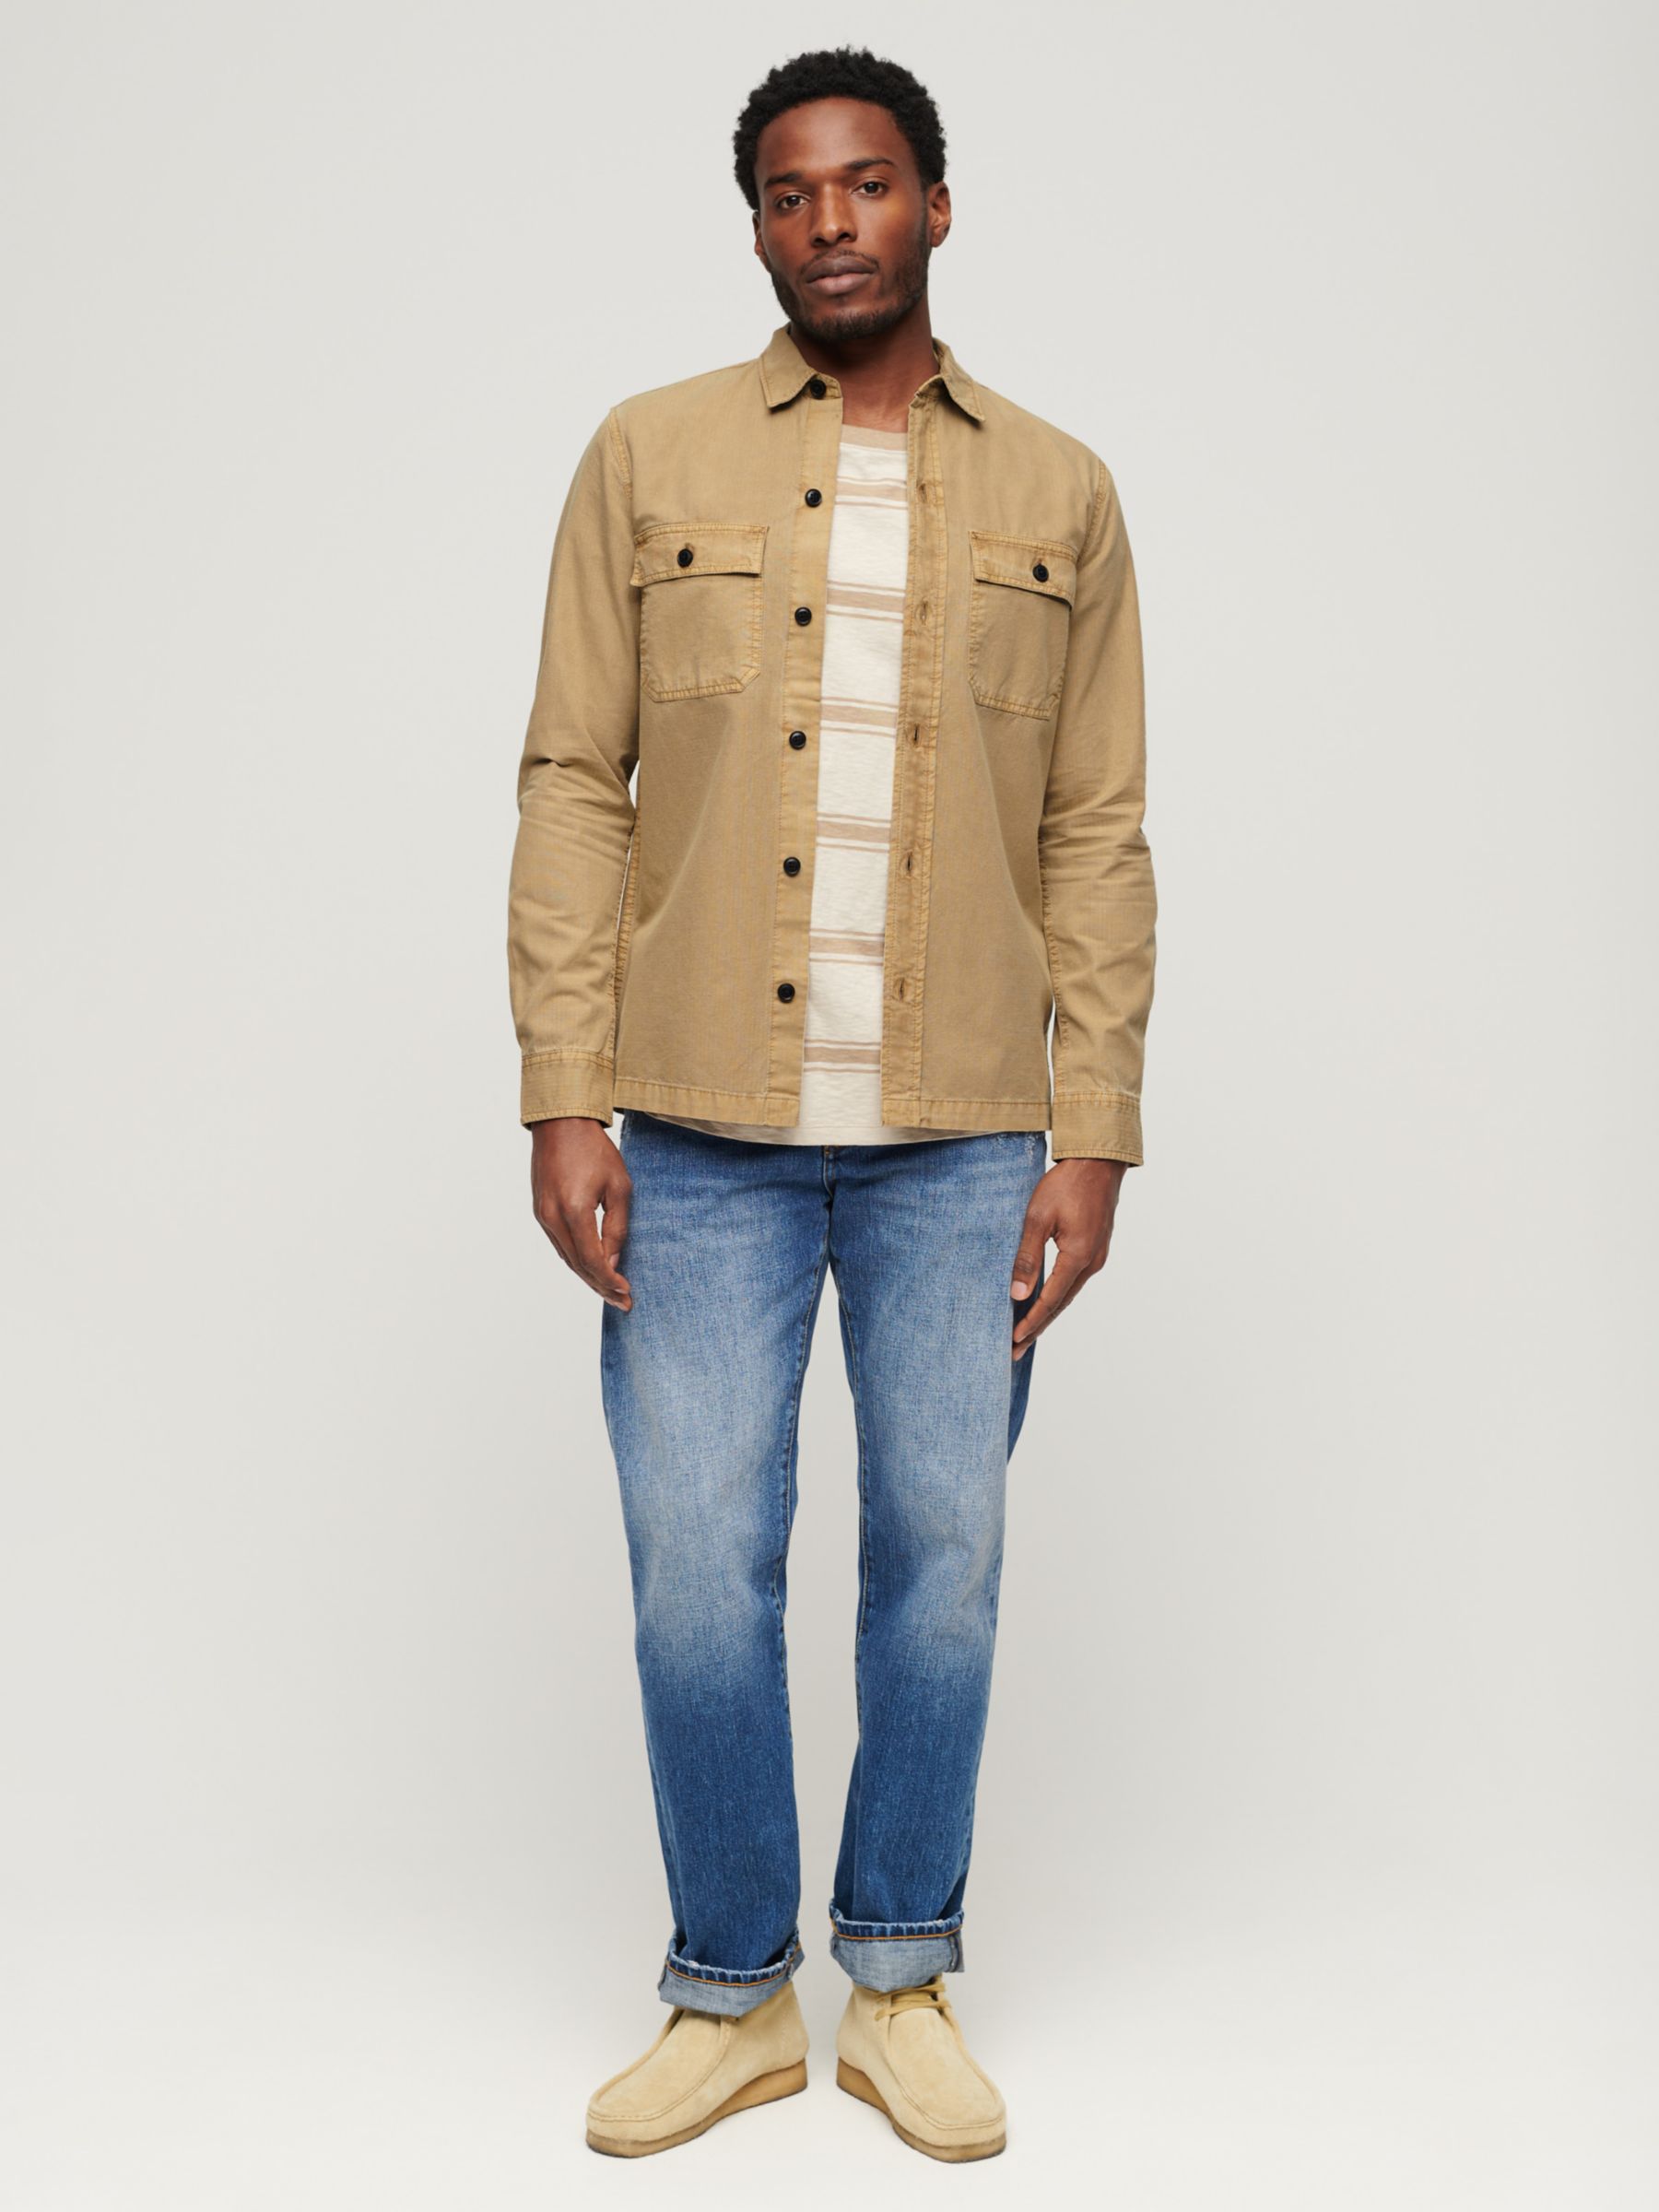 Buy Superdry Military Long Sleeve Shirt Online at johnlewis.com